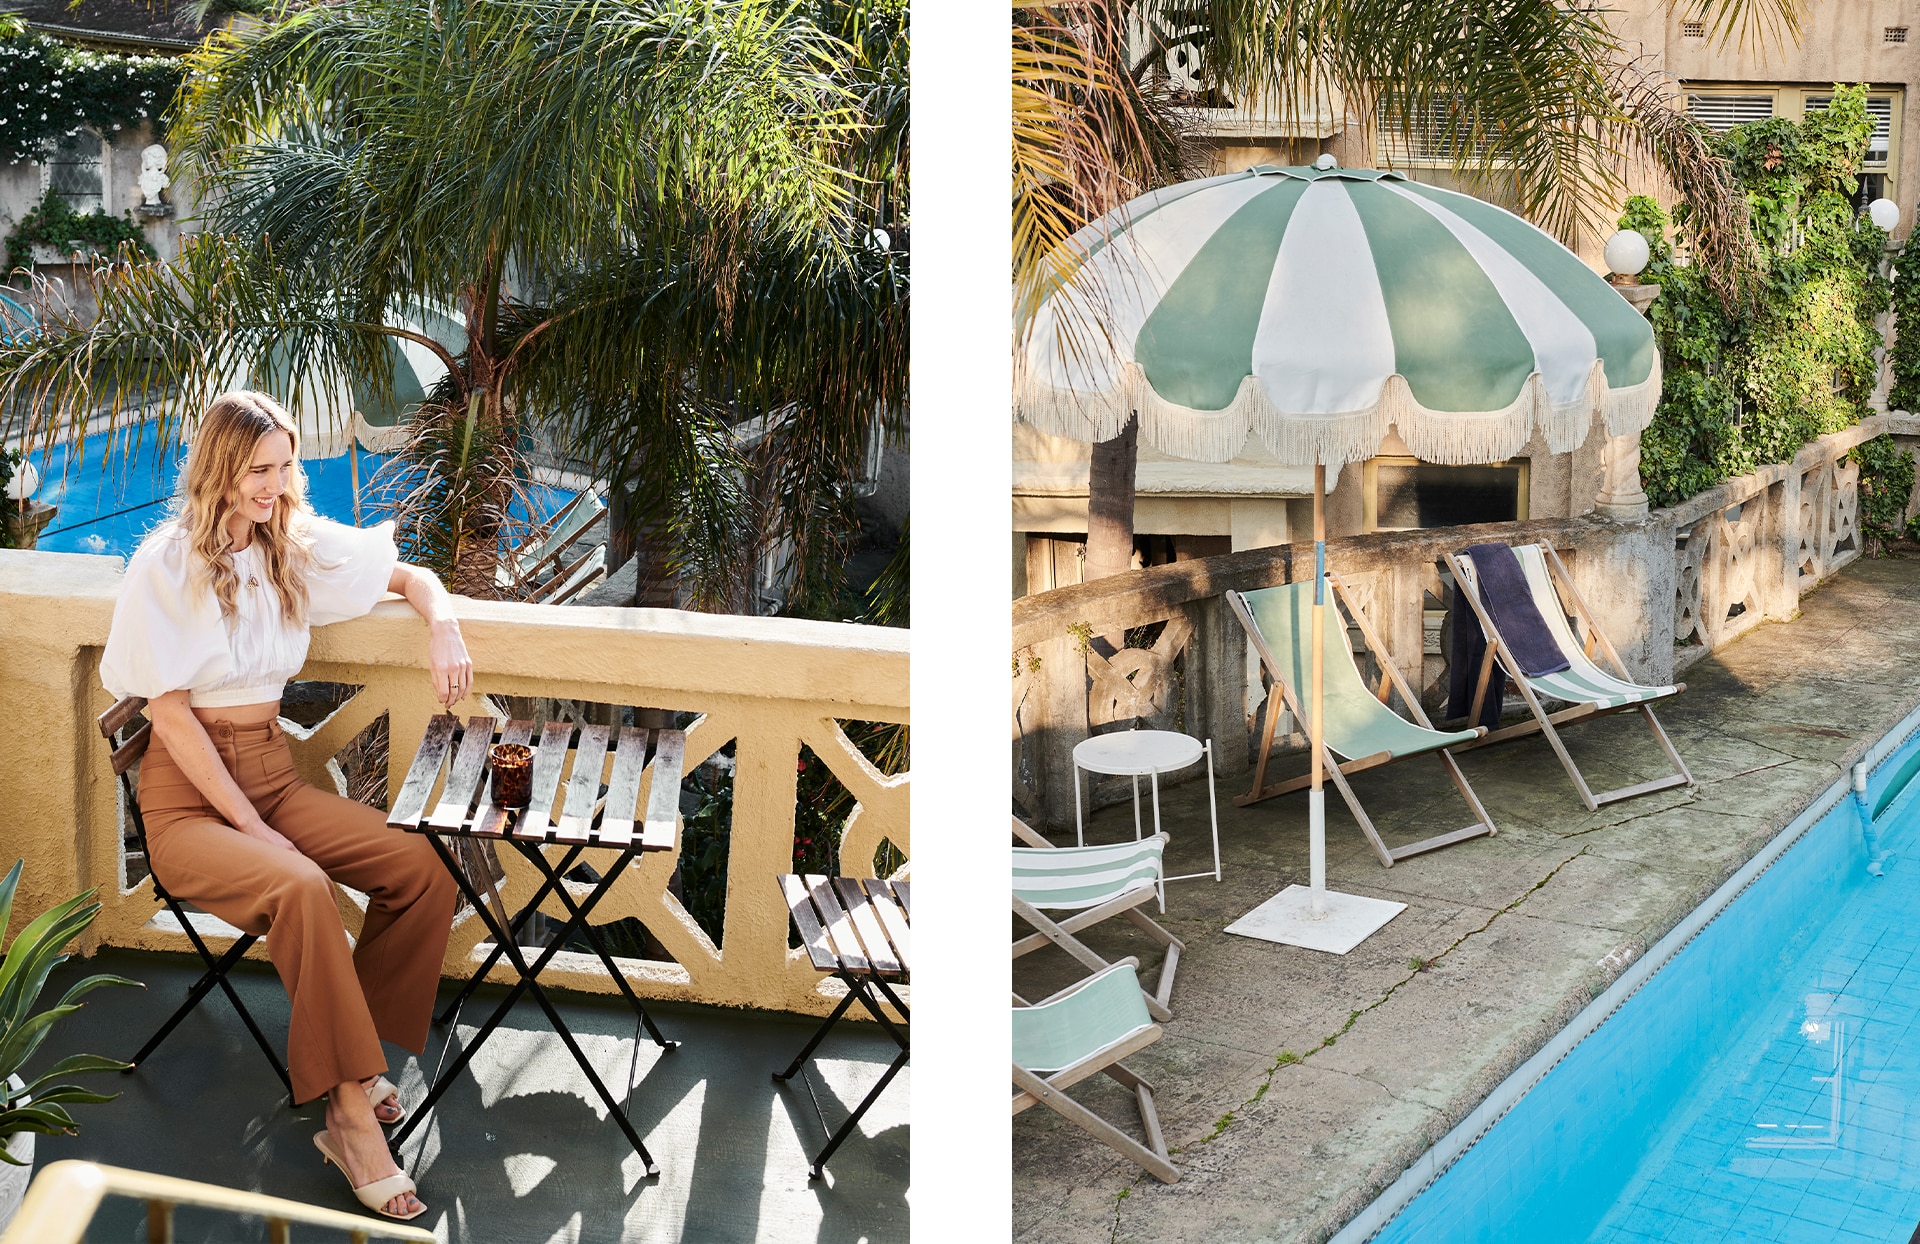 split image. right hand has bailey jones sitting on balcony, with blue pool and palm trees in background. left side has corner of pool, tiles, four deck chairs with a sheridan ultimate indulgence towel, and green and white standing umbrella.